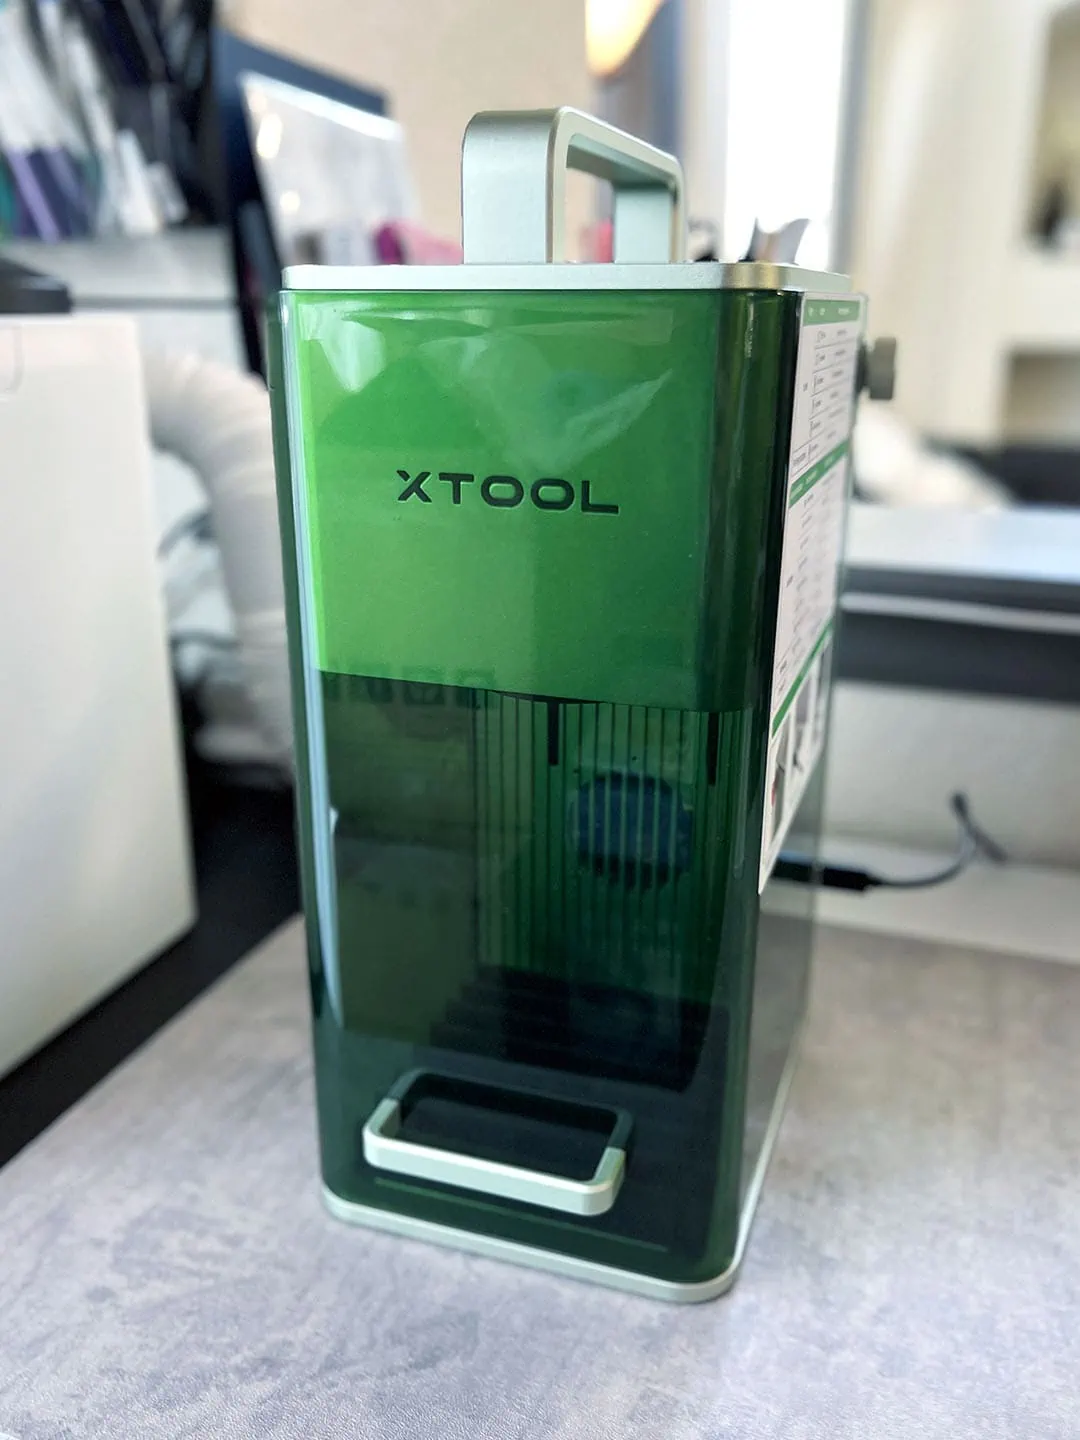 xTool F1 Portable Laser Engraver Review - Crafting in the Rain